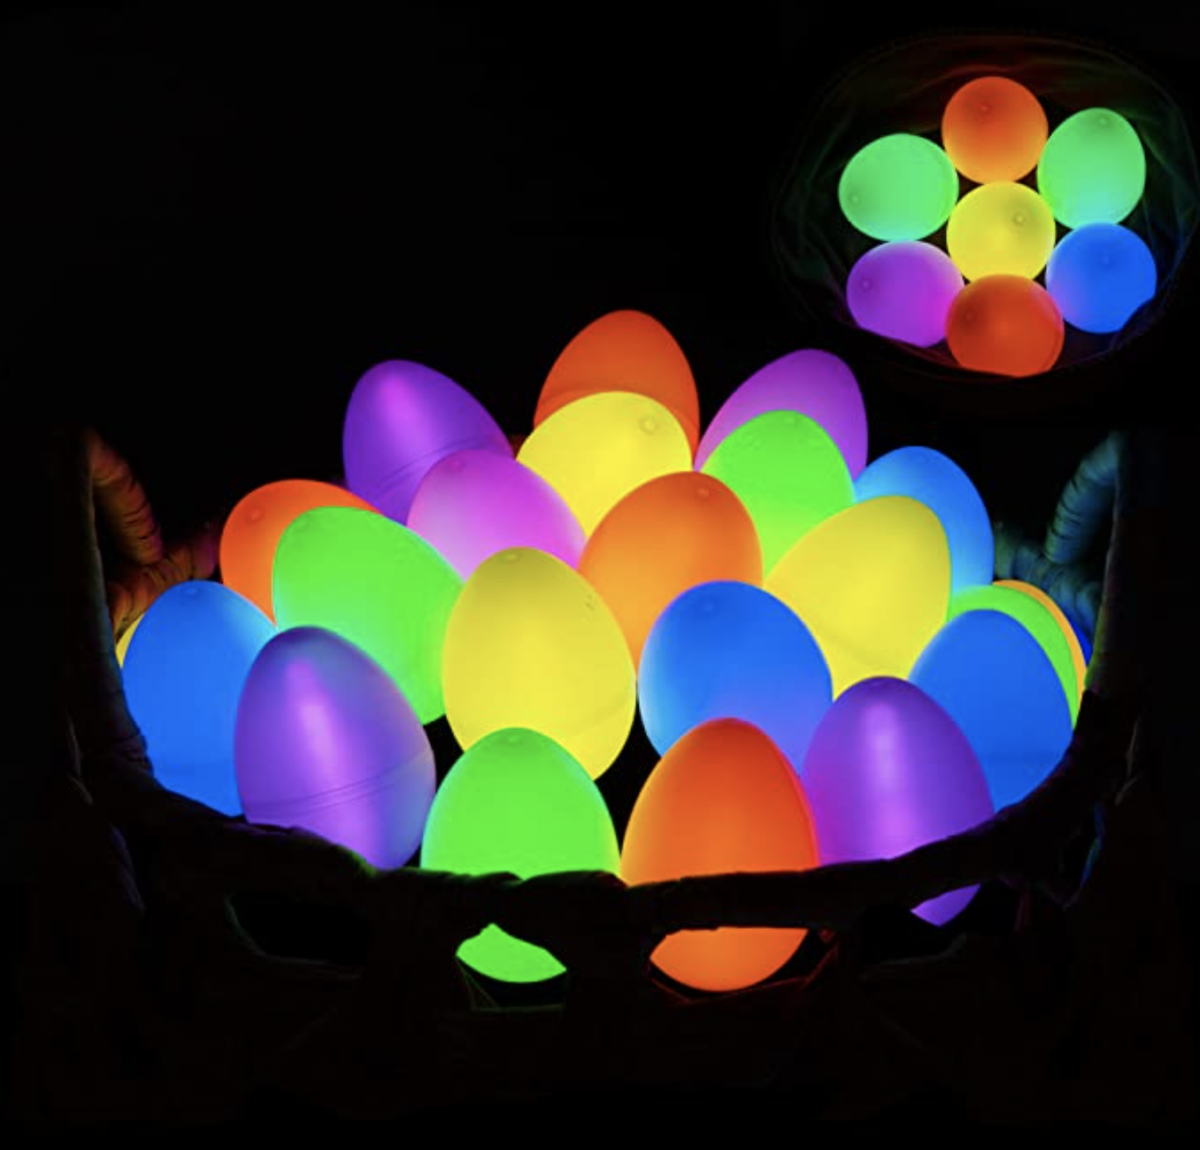 Light-up Easter Eggs from Amazon